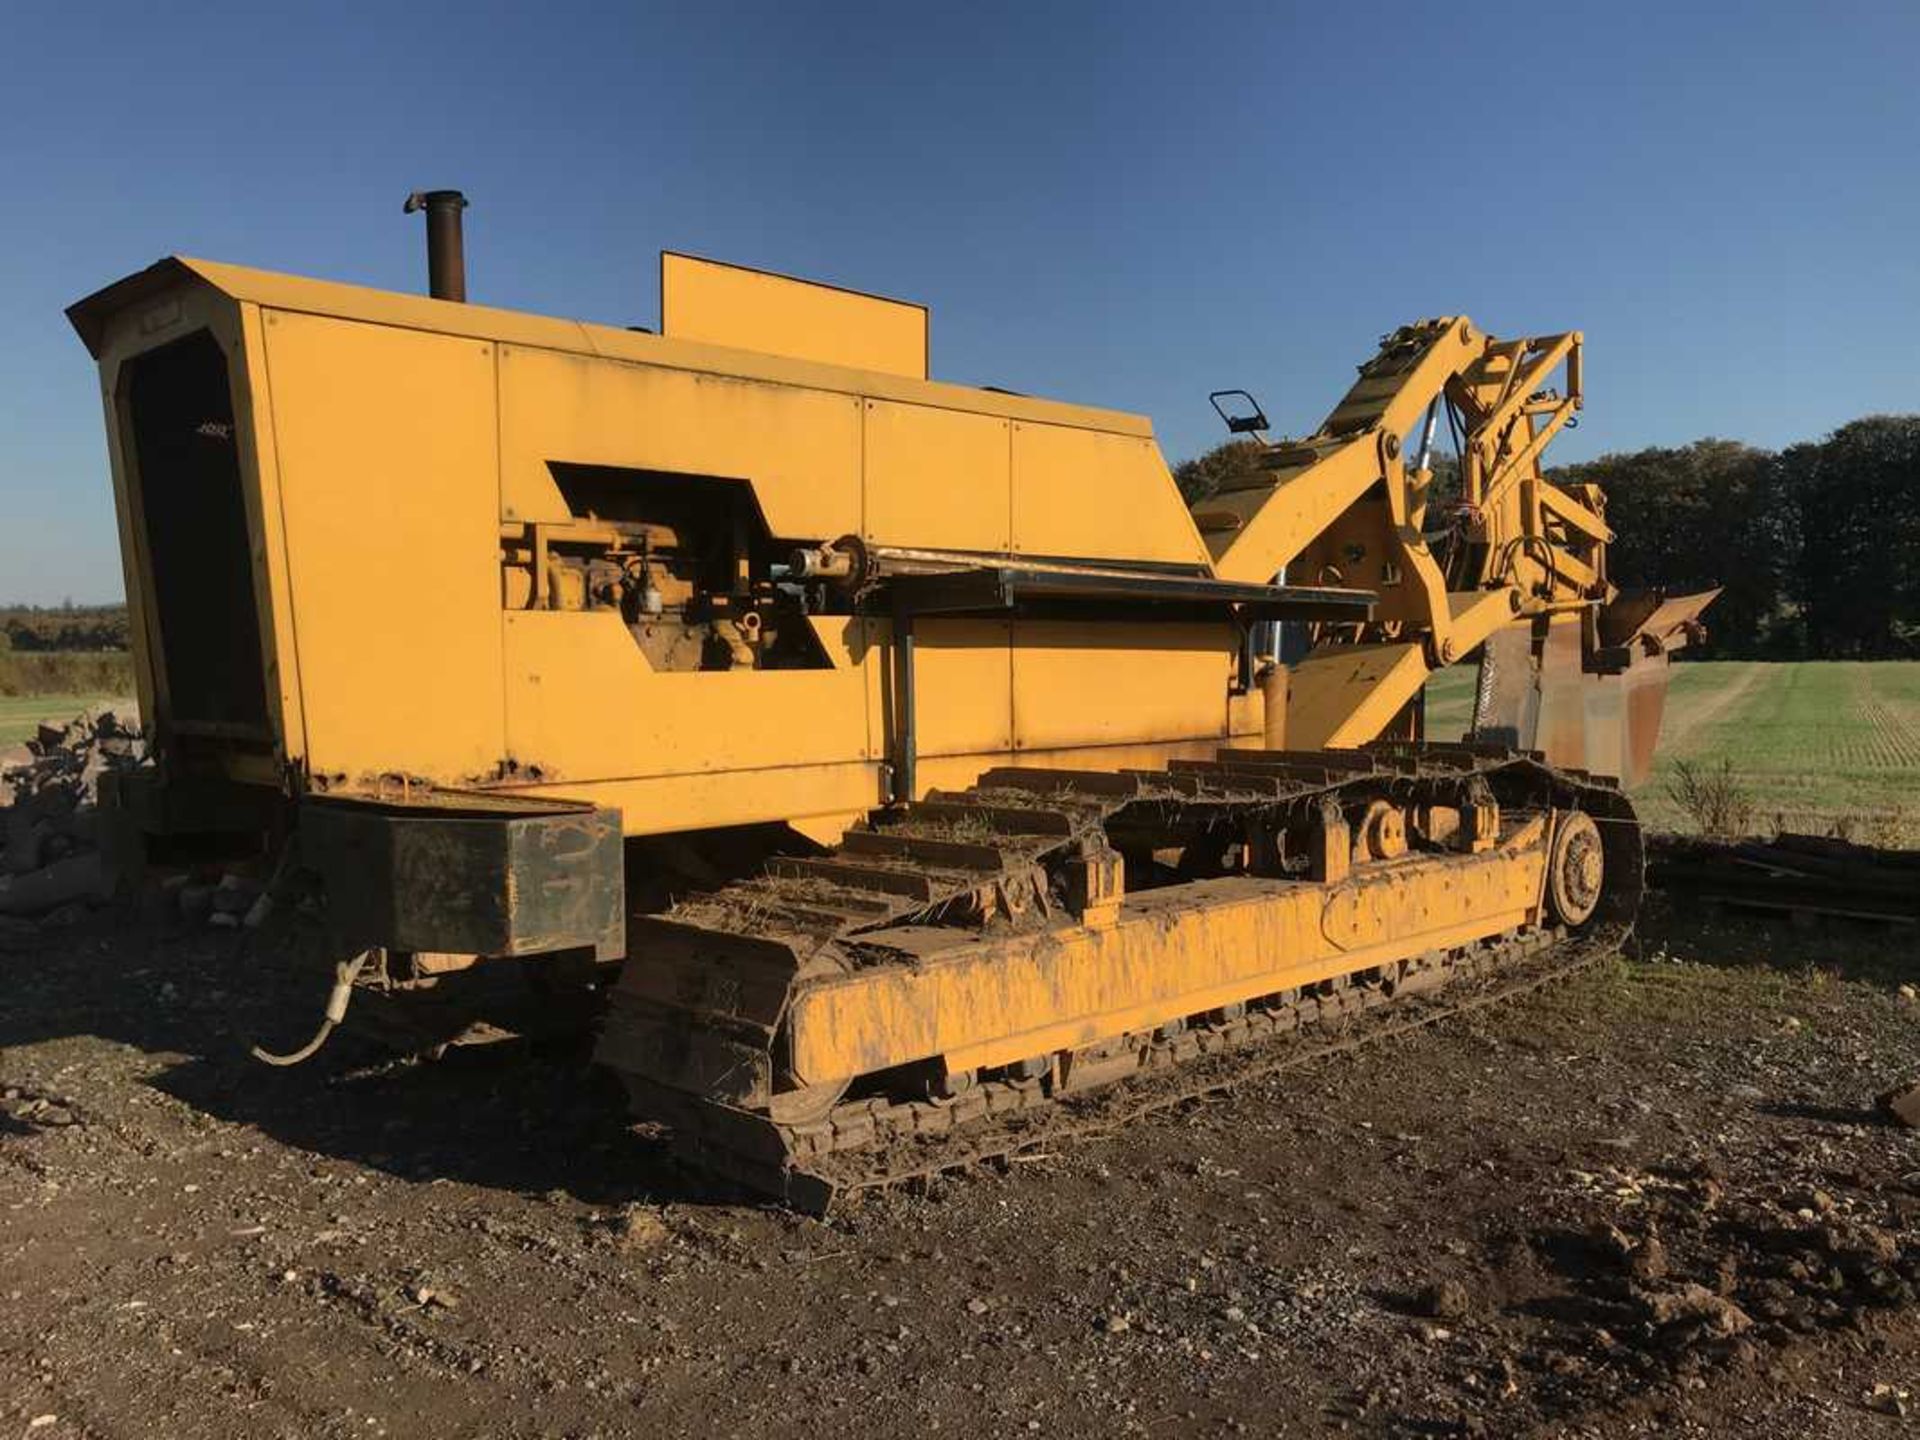 1984 INTER-DRAIN LTD Trenchless. Model 2032GP. S/N D84051. Tracked trencher. Trimble laser control s - Image 17 of 30